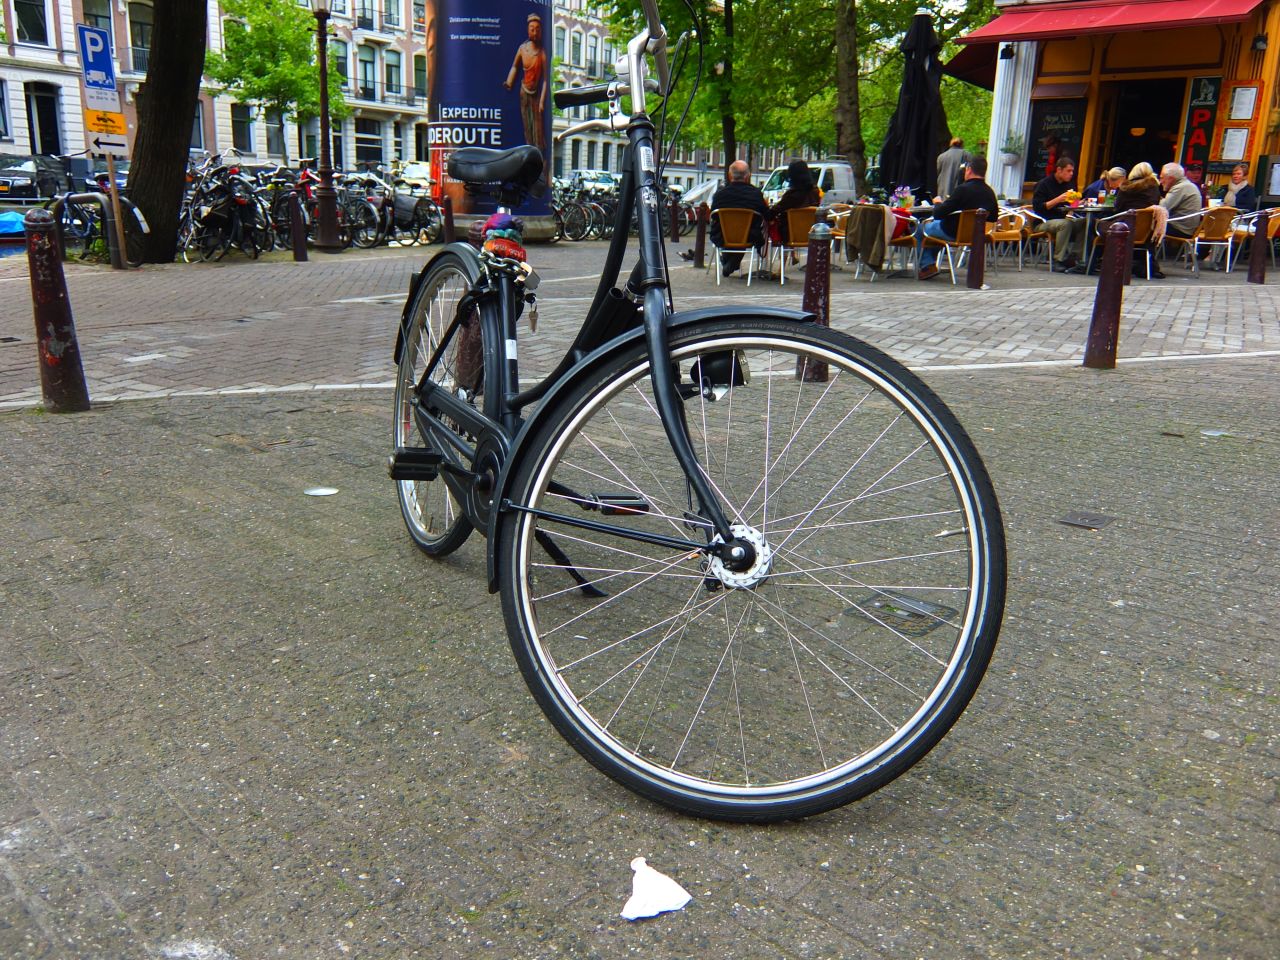 Many big companies rent out bikes in lurid colors. The key to blending in is renting a typical Dutch-style cycle, like this black, indestructible machine. 